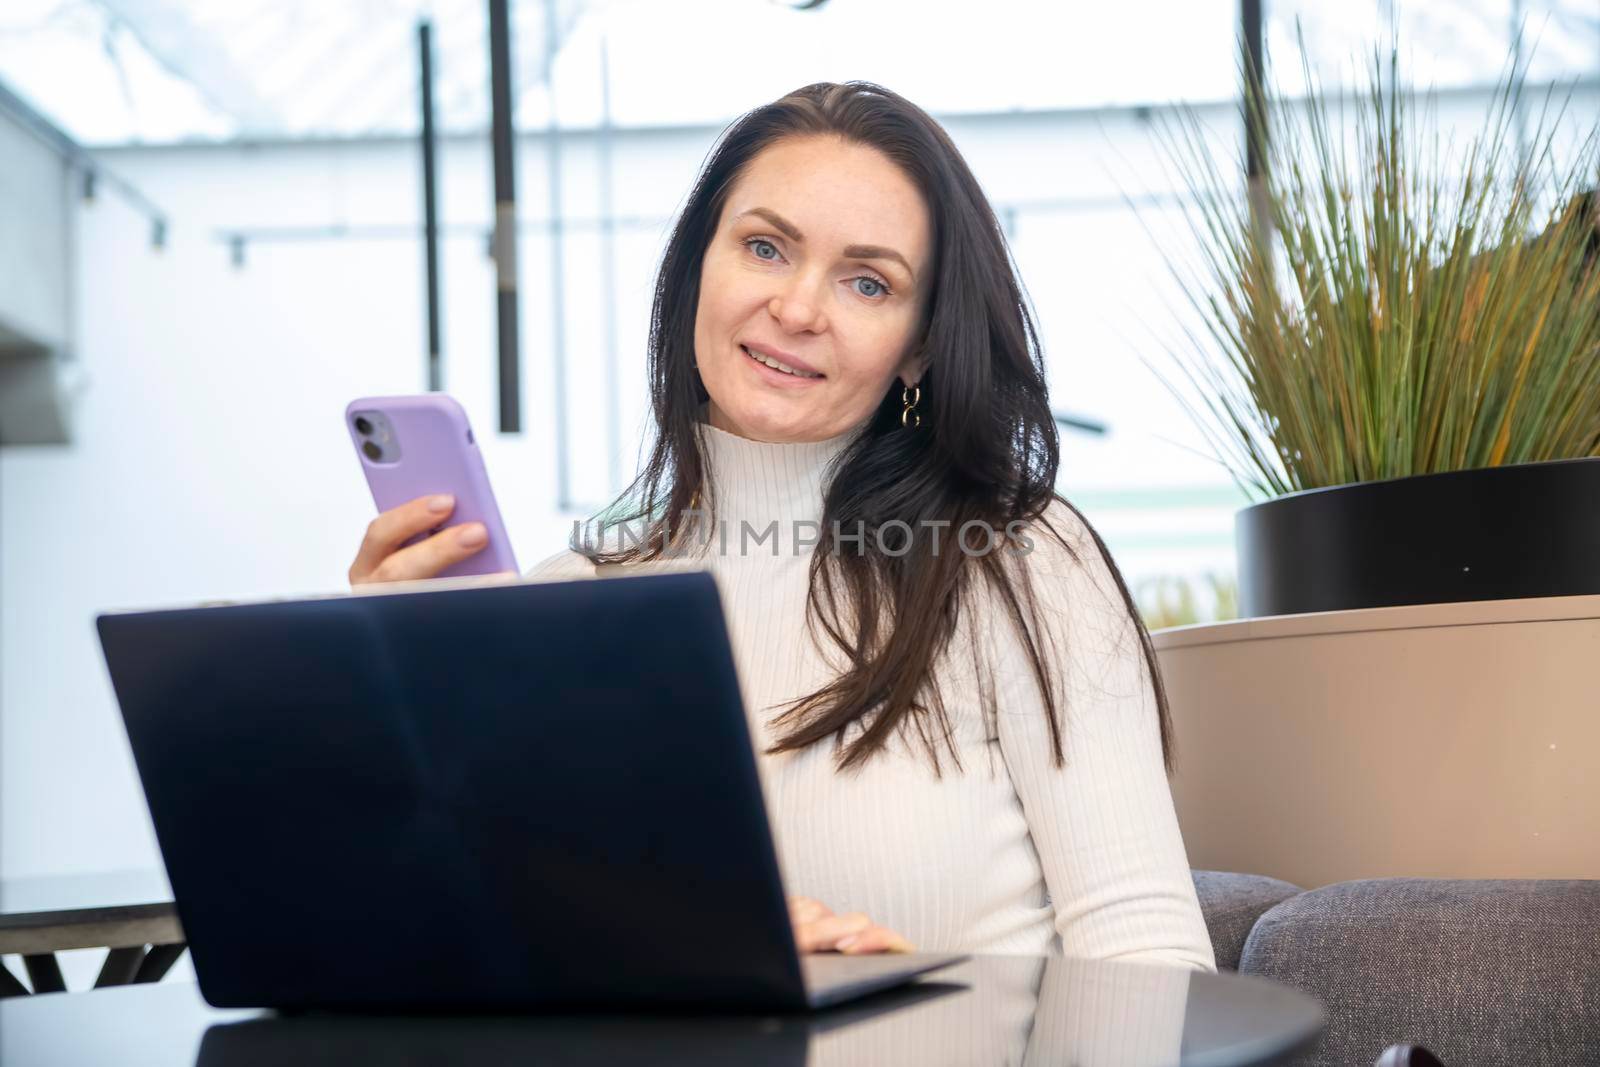 young woman works on laptop and smartphone in cafe.